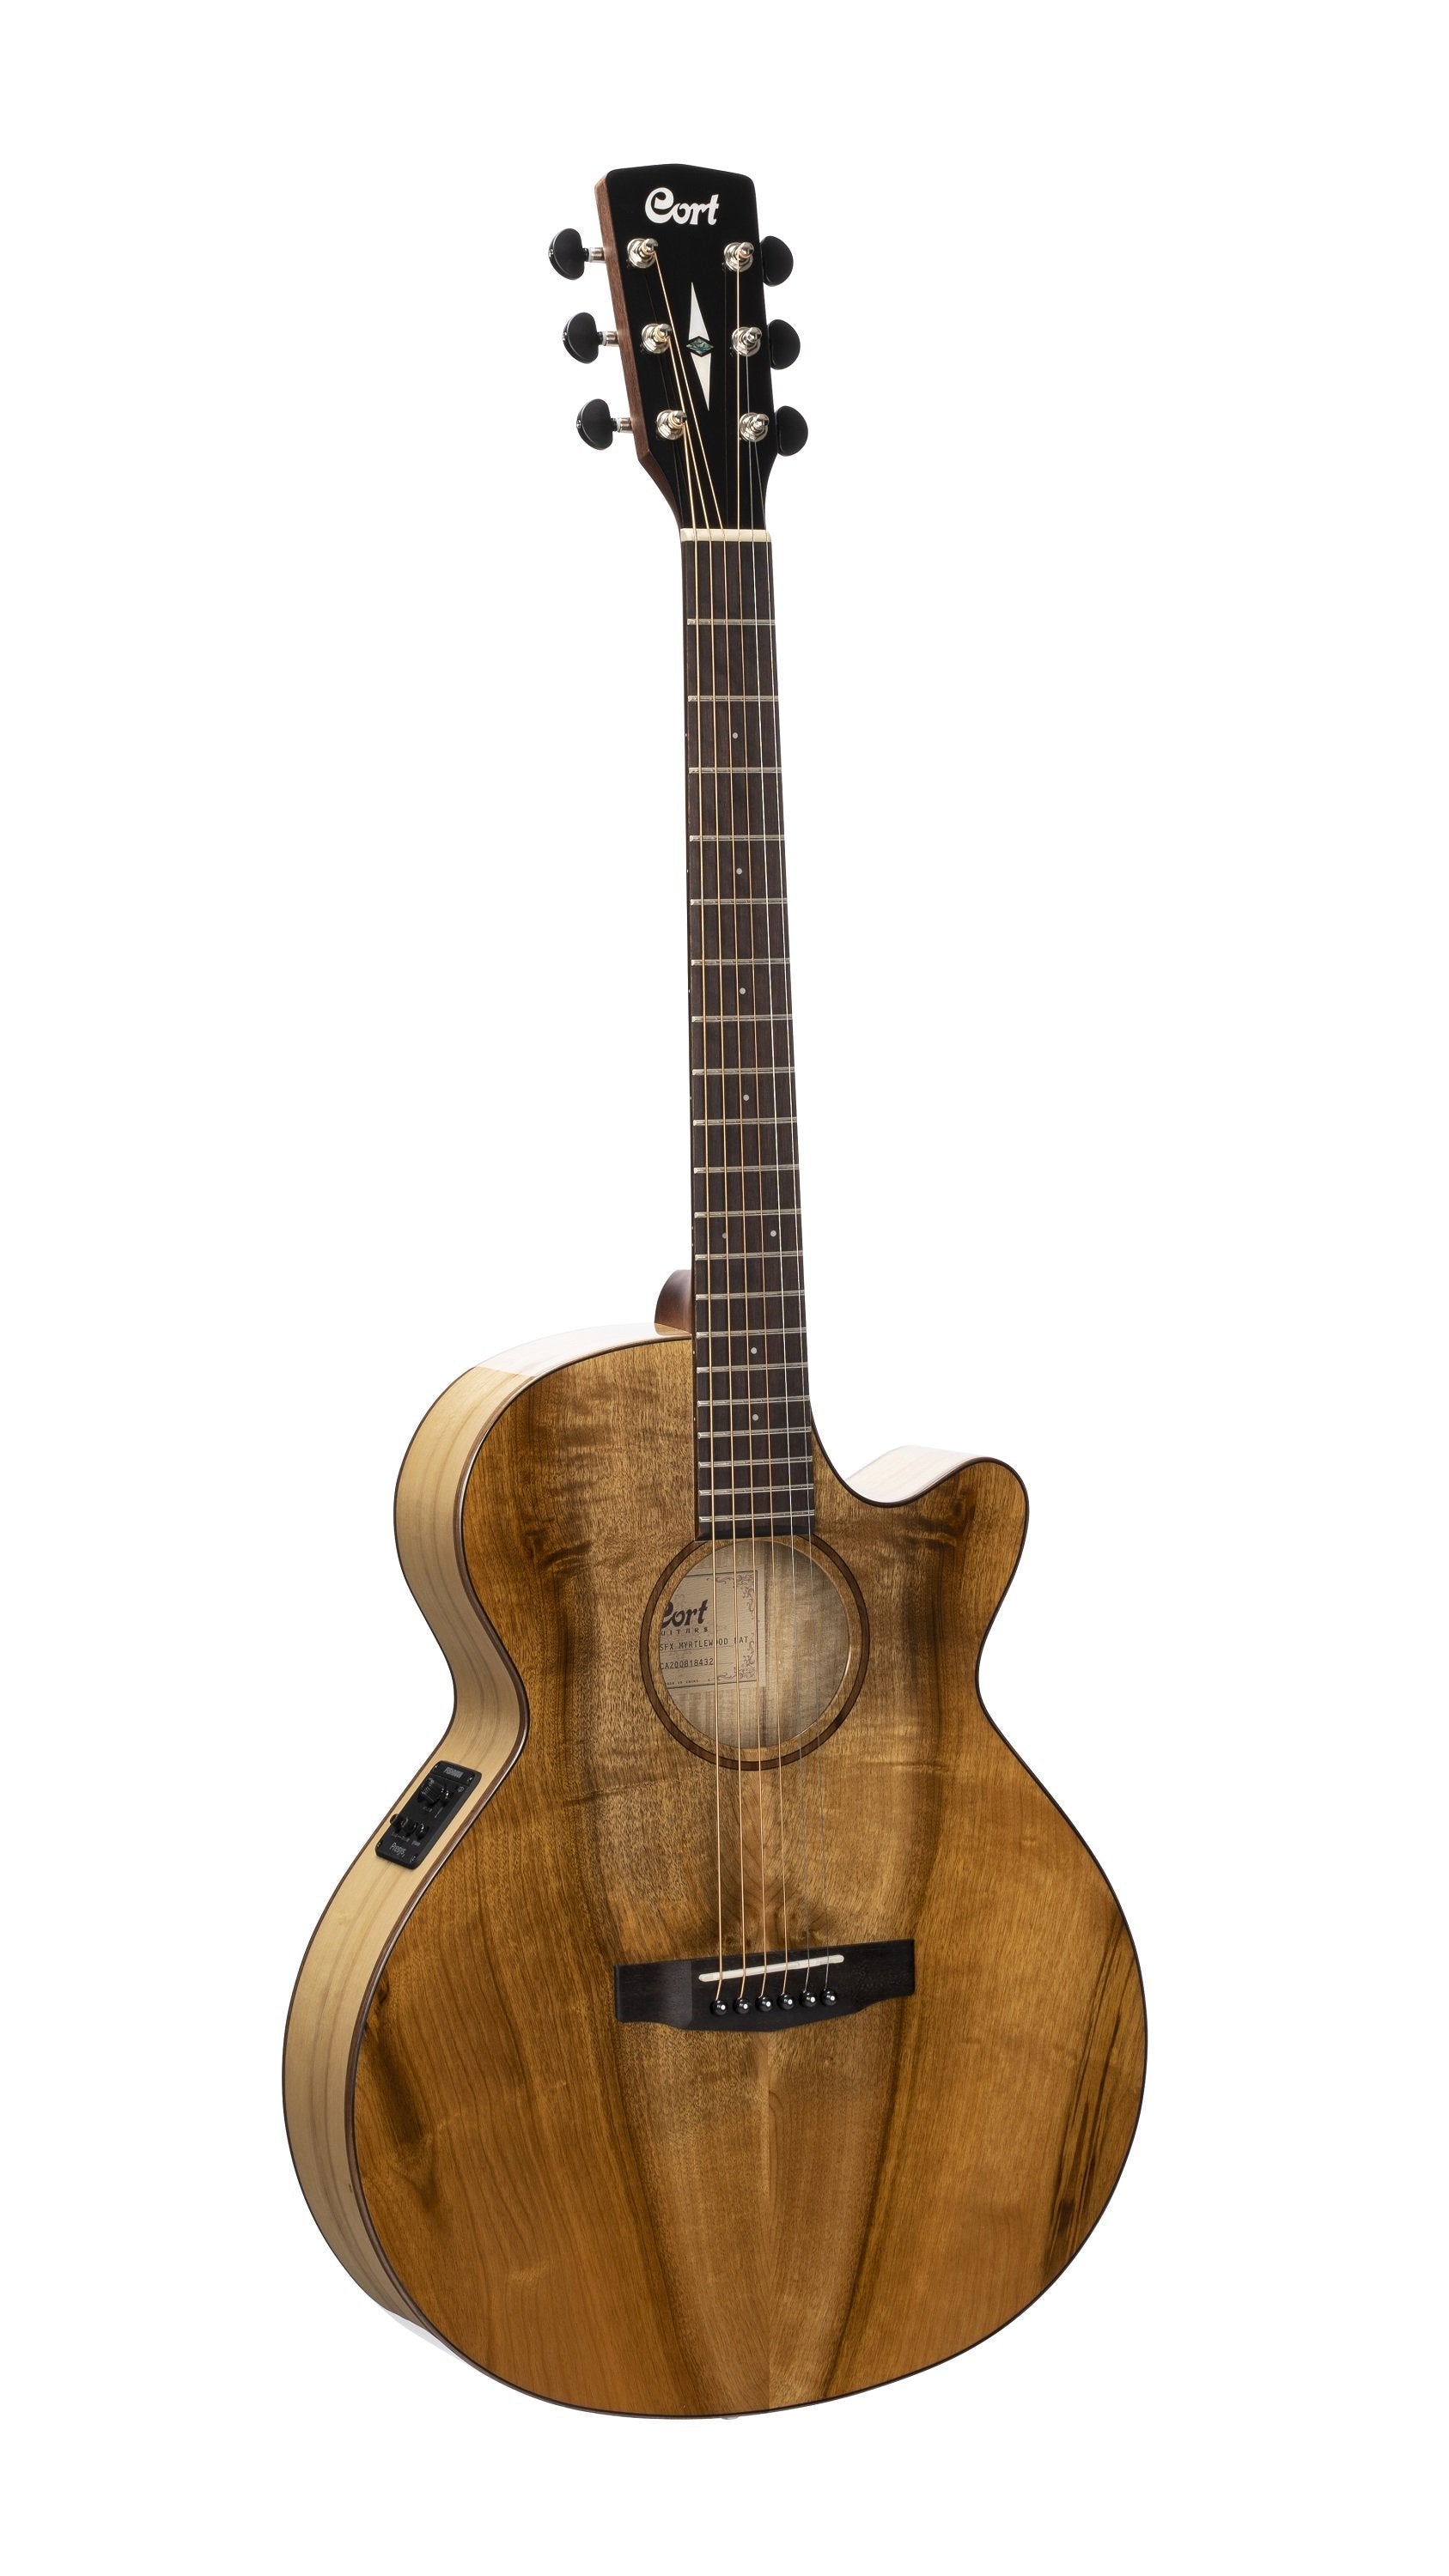 Cort SFX All Myrtlewood Natural Gloss, Electro Acoustic Guitar for sale at Richards Guitars.